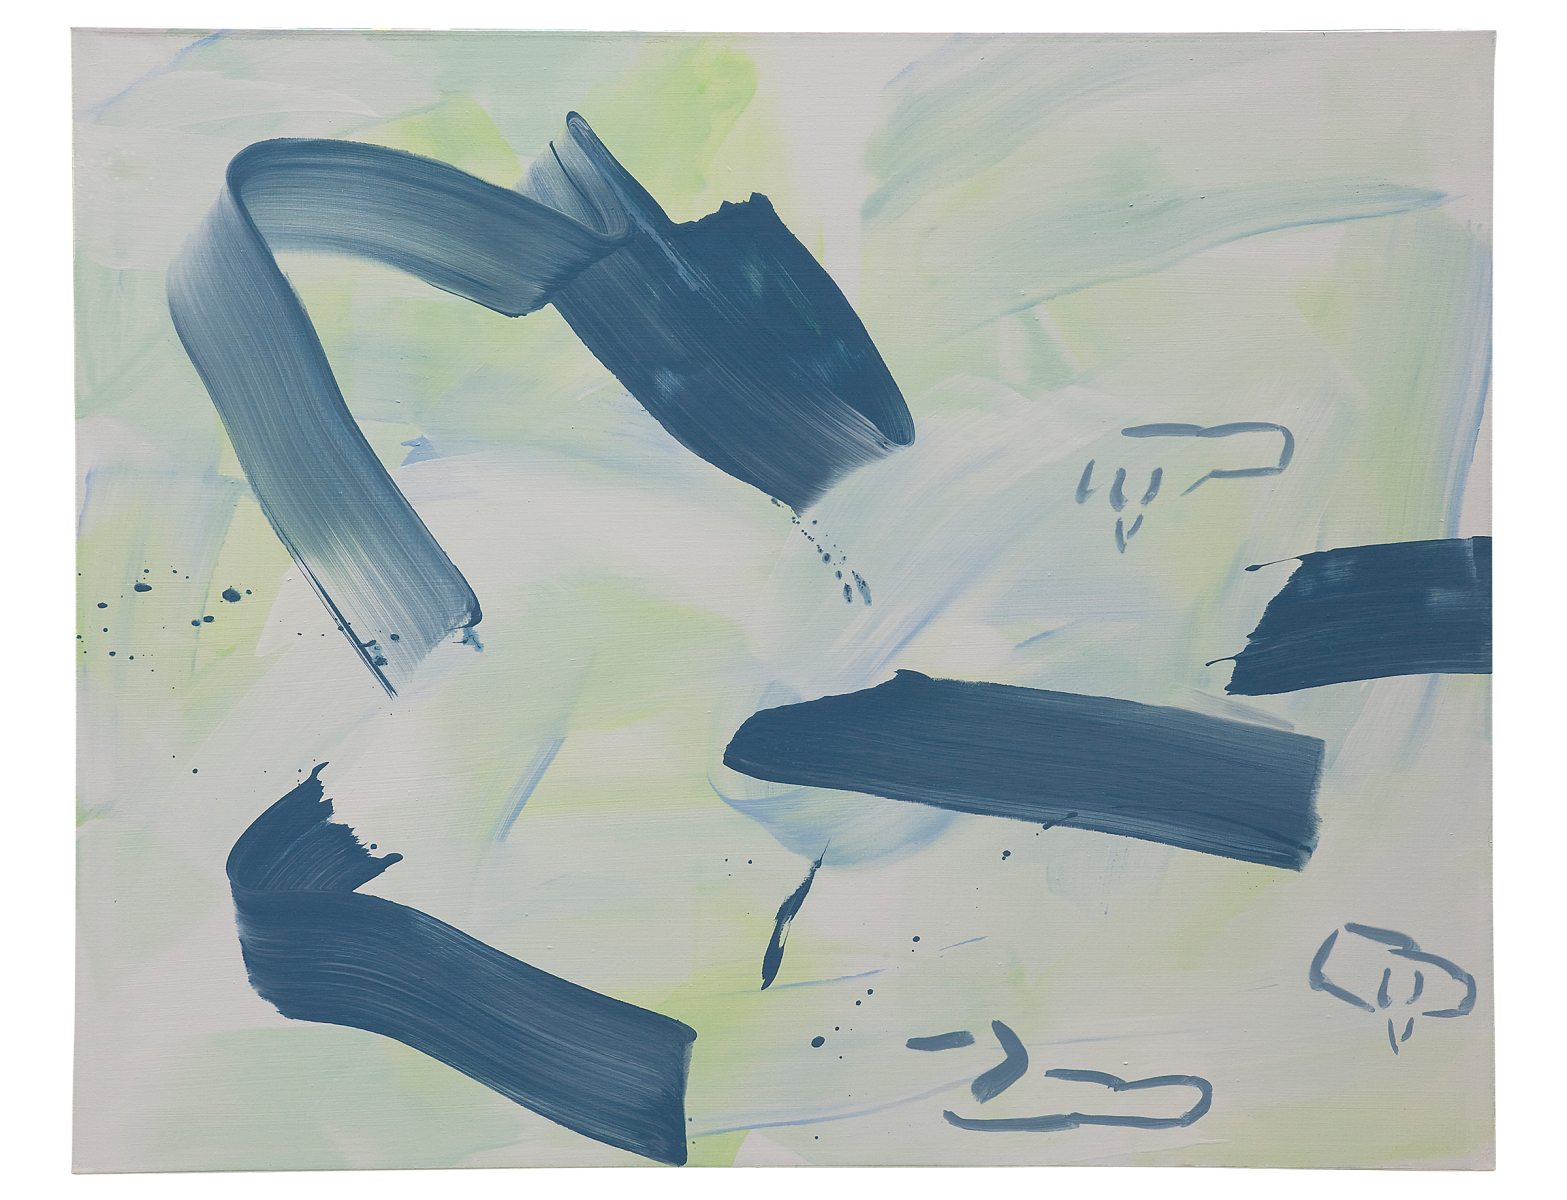 Becoming-08138, 2008, Acrylic on Canvas, 130.3x162cm
